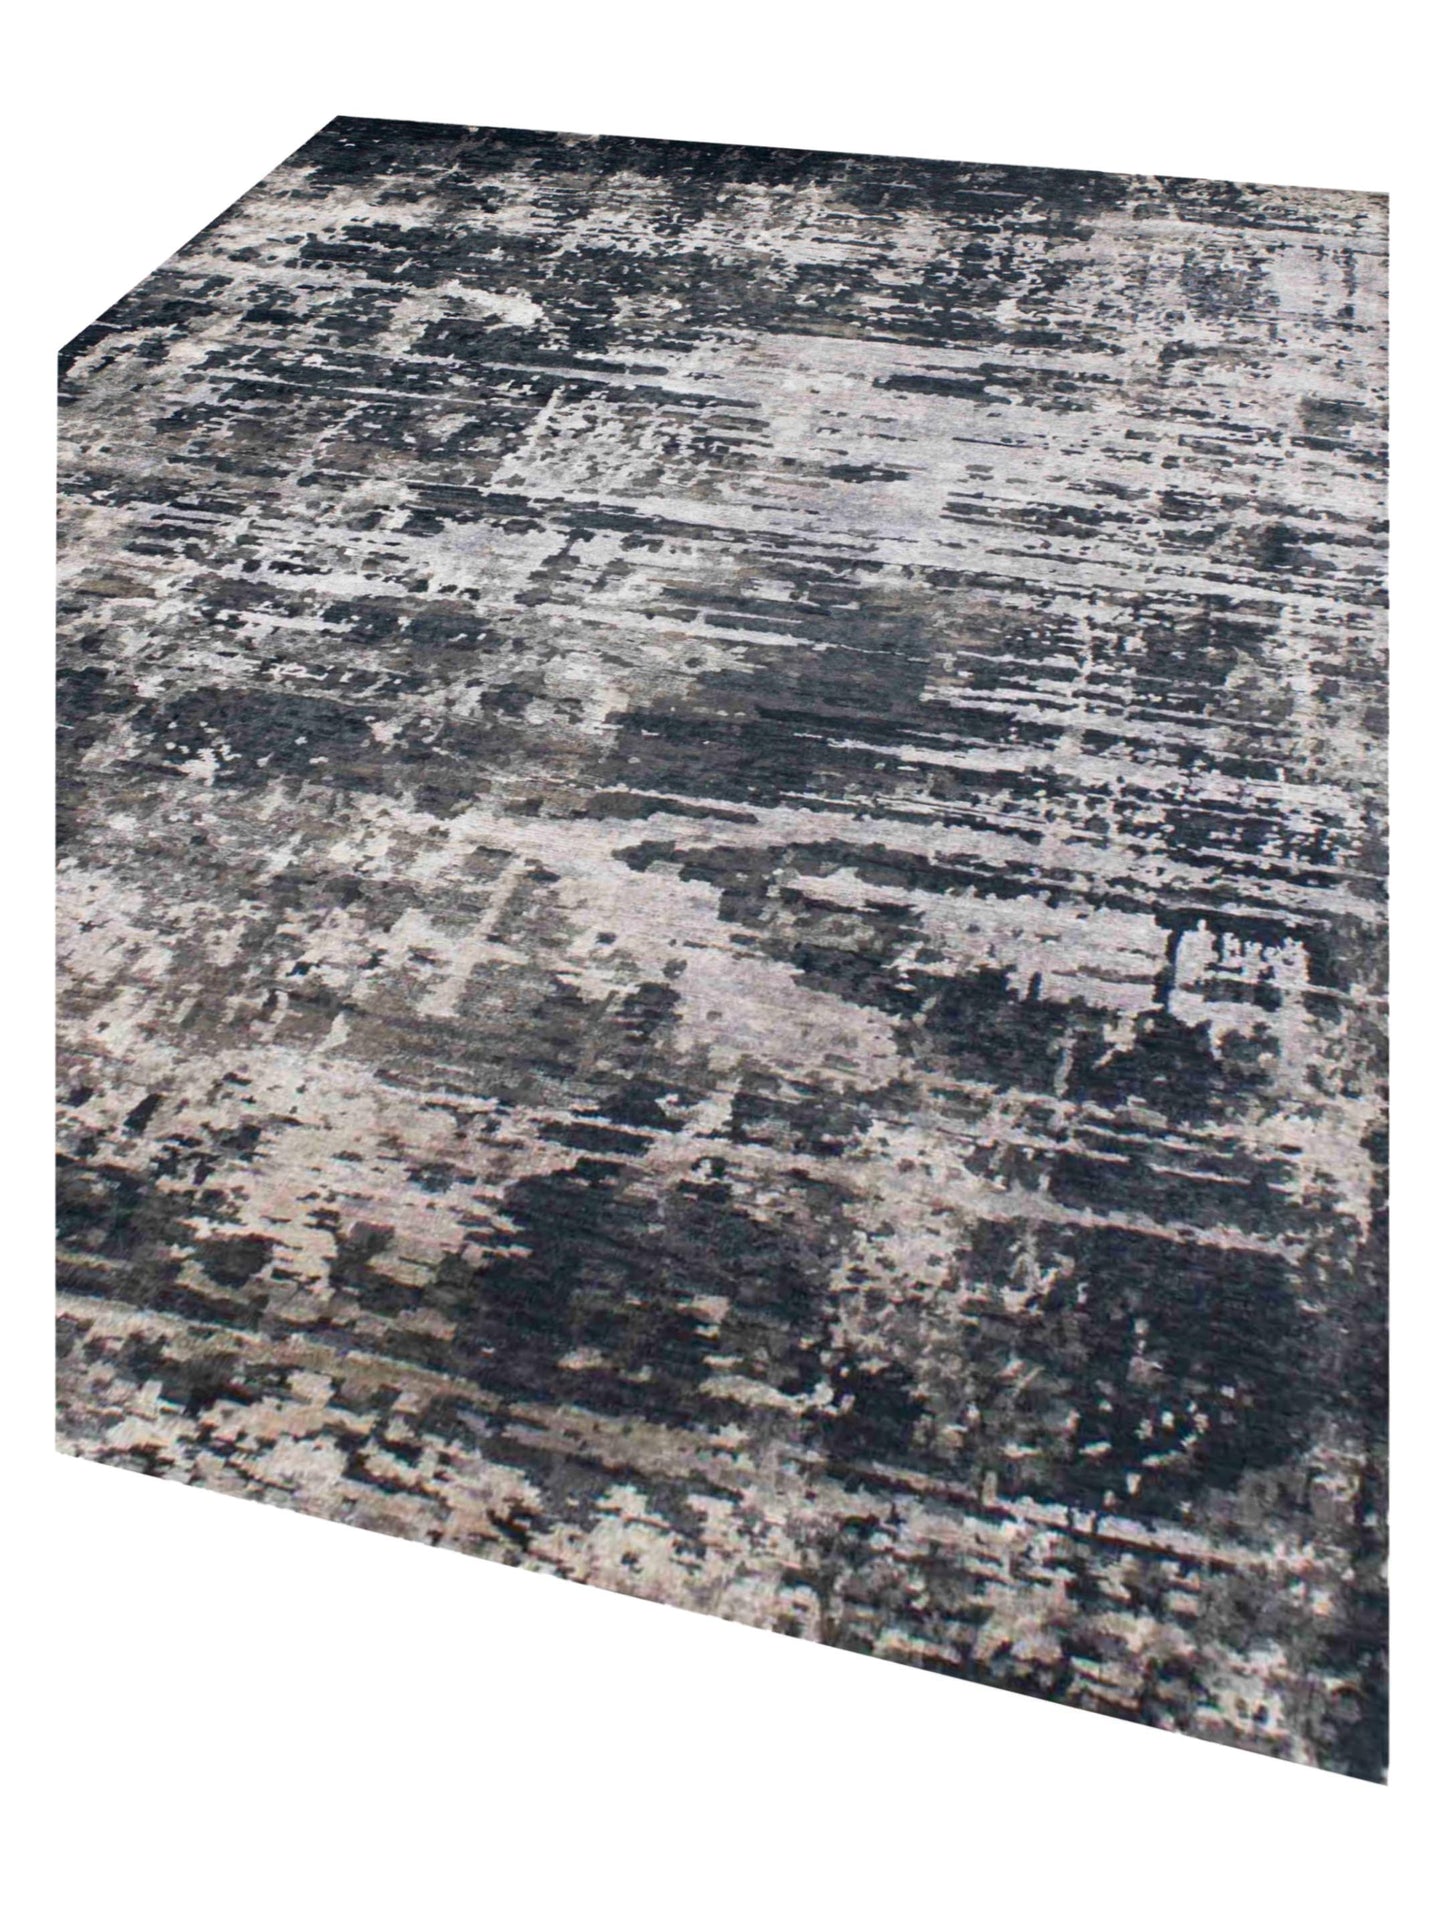 Artisan Mary  Silver  Contemporary Knotted Rug